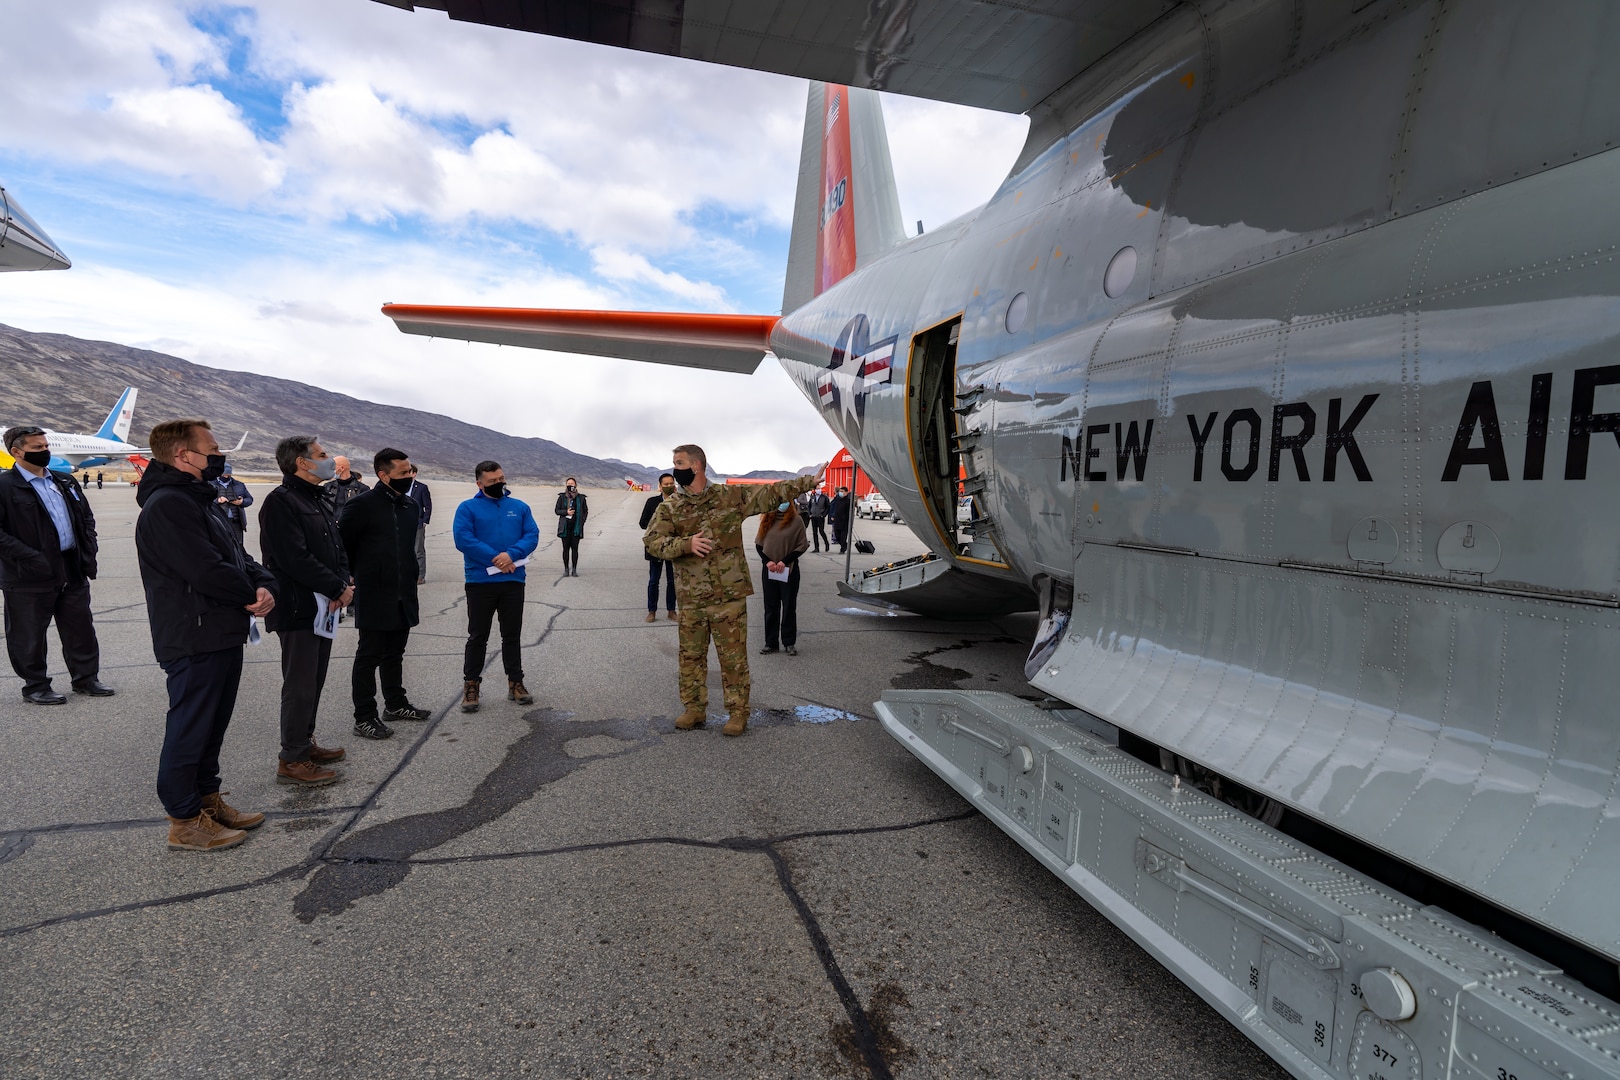 New York Air National Guard Maj. Shay Price, an LC-130 navigator, briefs Secretary of State Antony J. Blinken and Greenland Premier Múte Bourup Egede, and other officials, about the LC-130s used by the wing to support climate science research on Greenland's Ice Cap at the Kangerlussuaq, Greenland, airport May 20, 2021. The 109th Airlift Wing operates from the airport when supporting National Science Foundation research in Greenland.